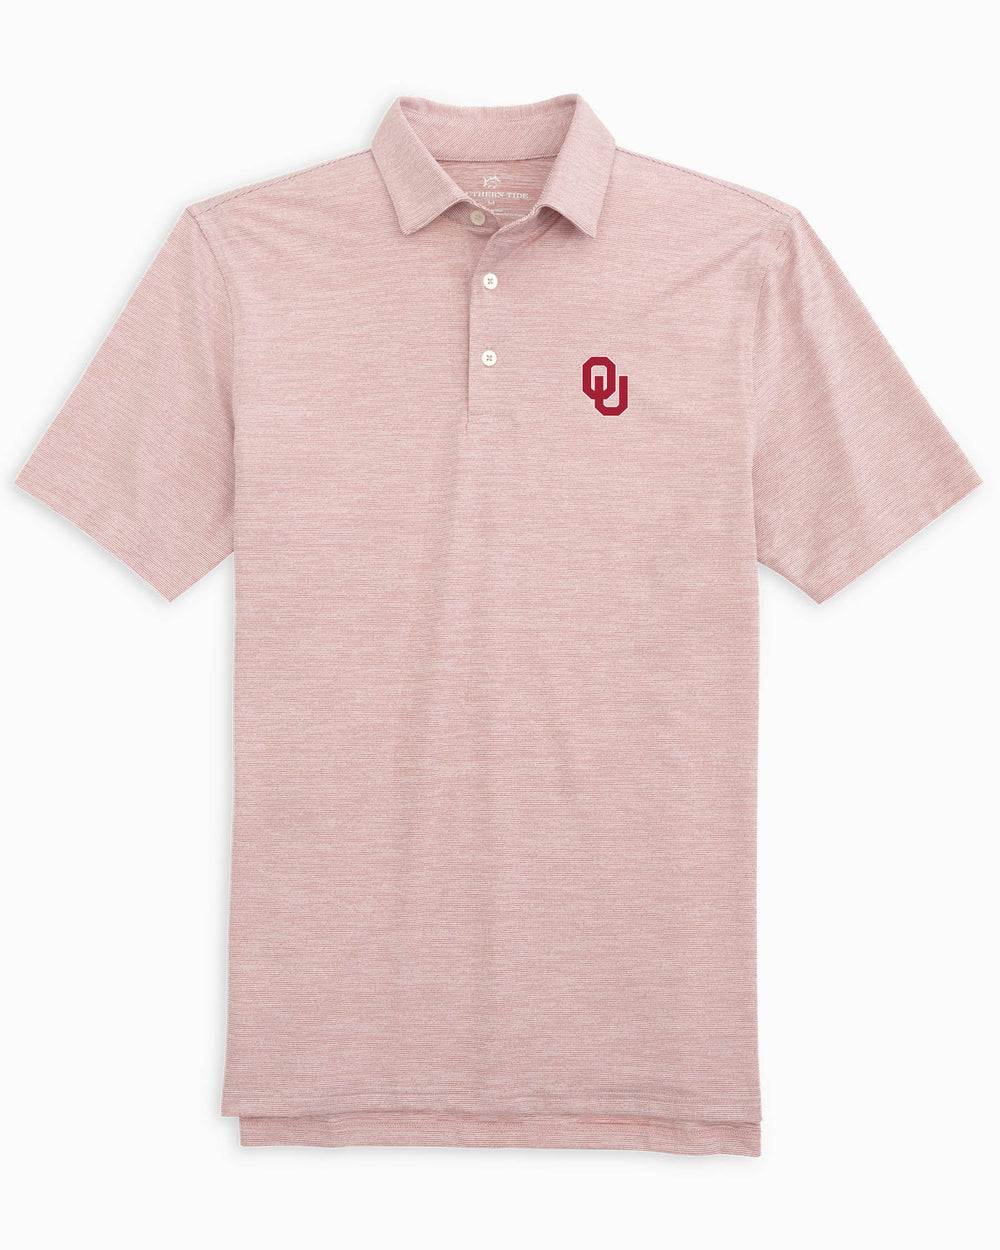 The front view of the Oklahoma Sooners Driver Spacedye Polo Shirt by Southern Tide - Crimson